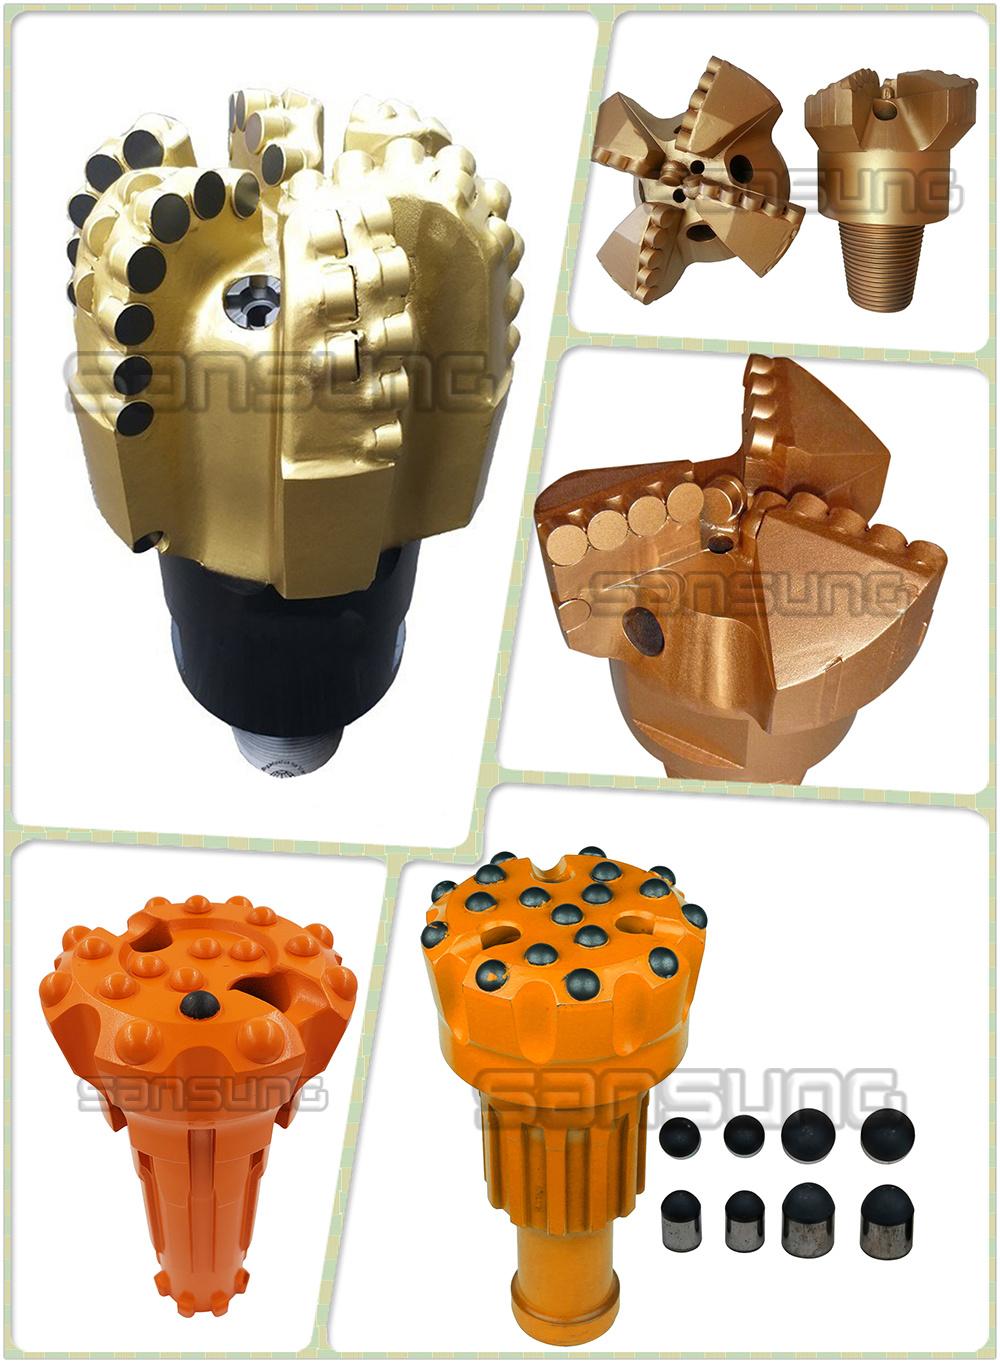 Diamond Composite PDC Cutter for Oil and Mine Drilling Industry